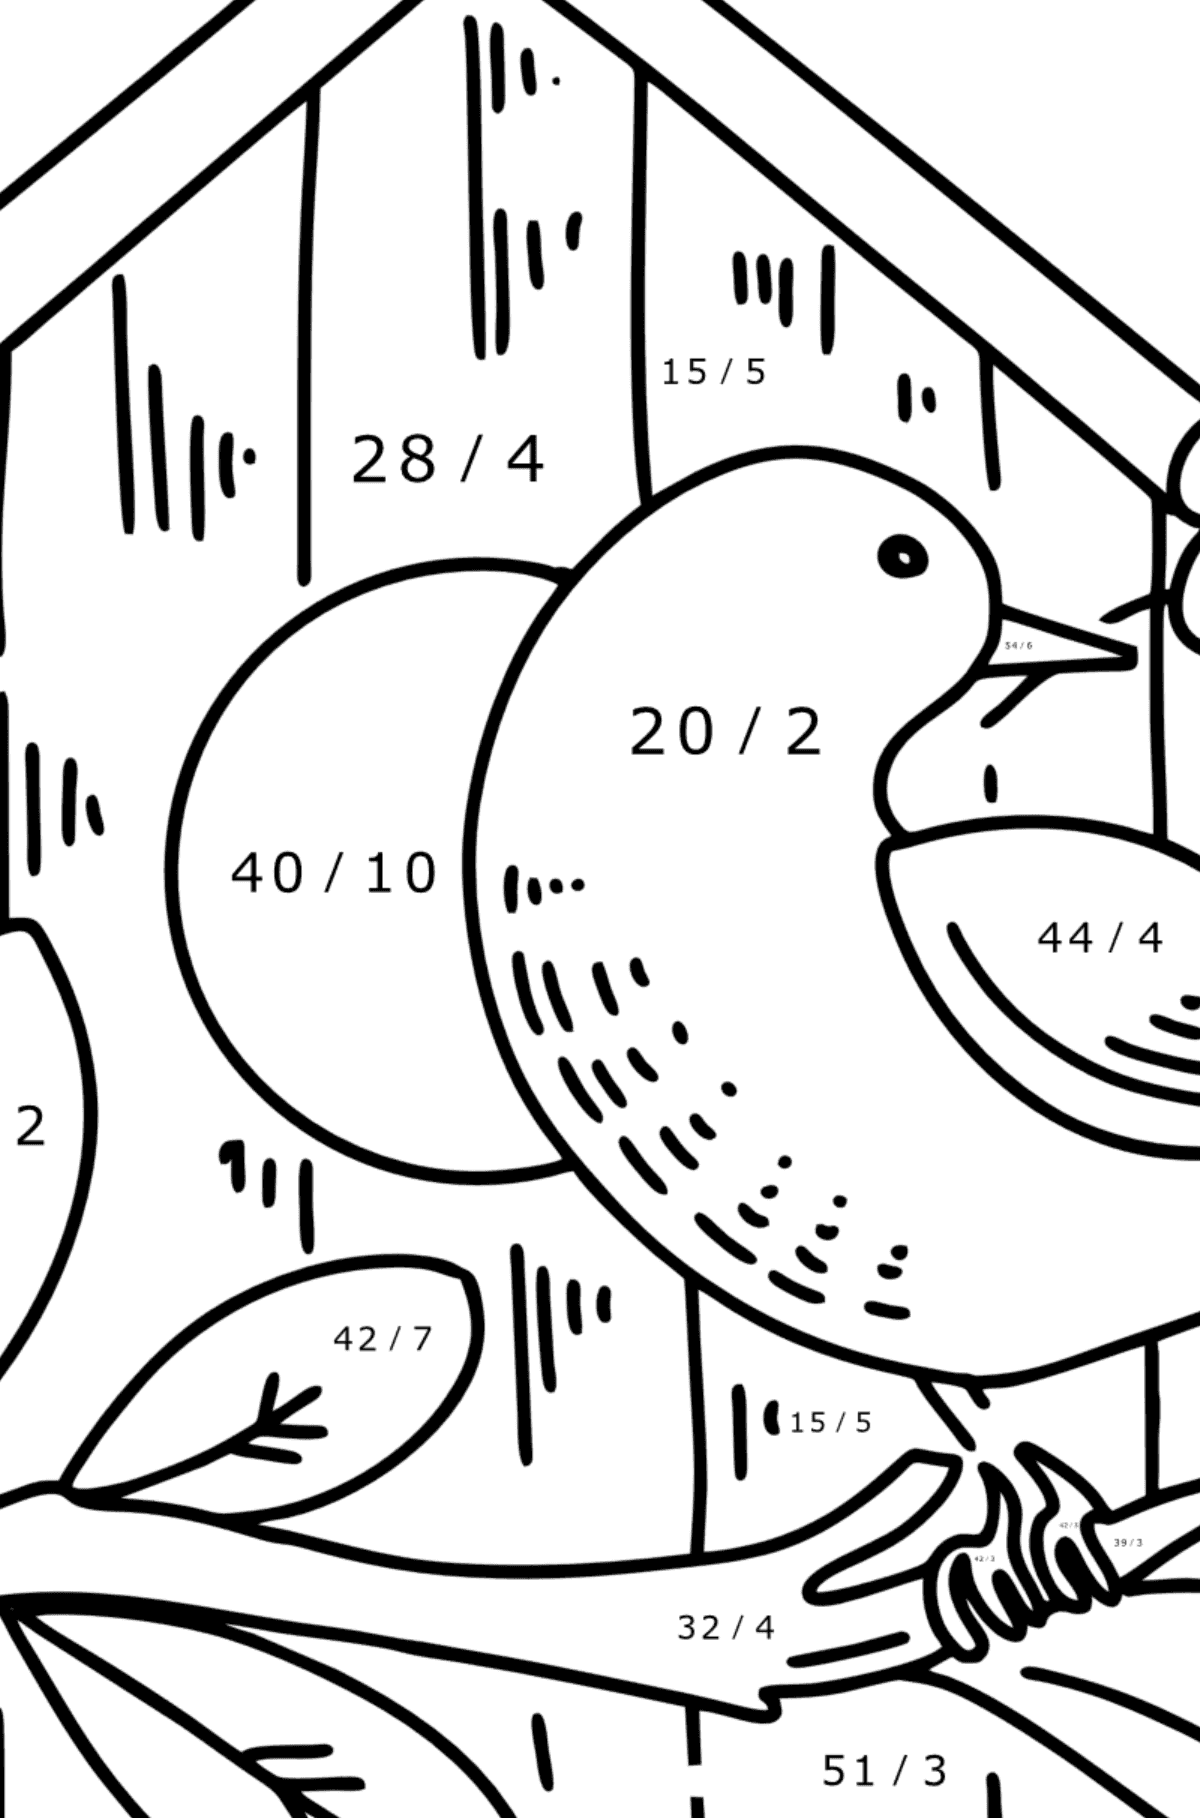 Starling at the Birdhouse coloring page - Math Coloring - Division for Kids